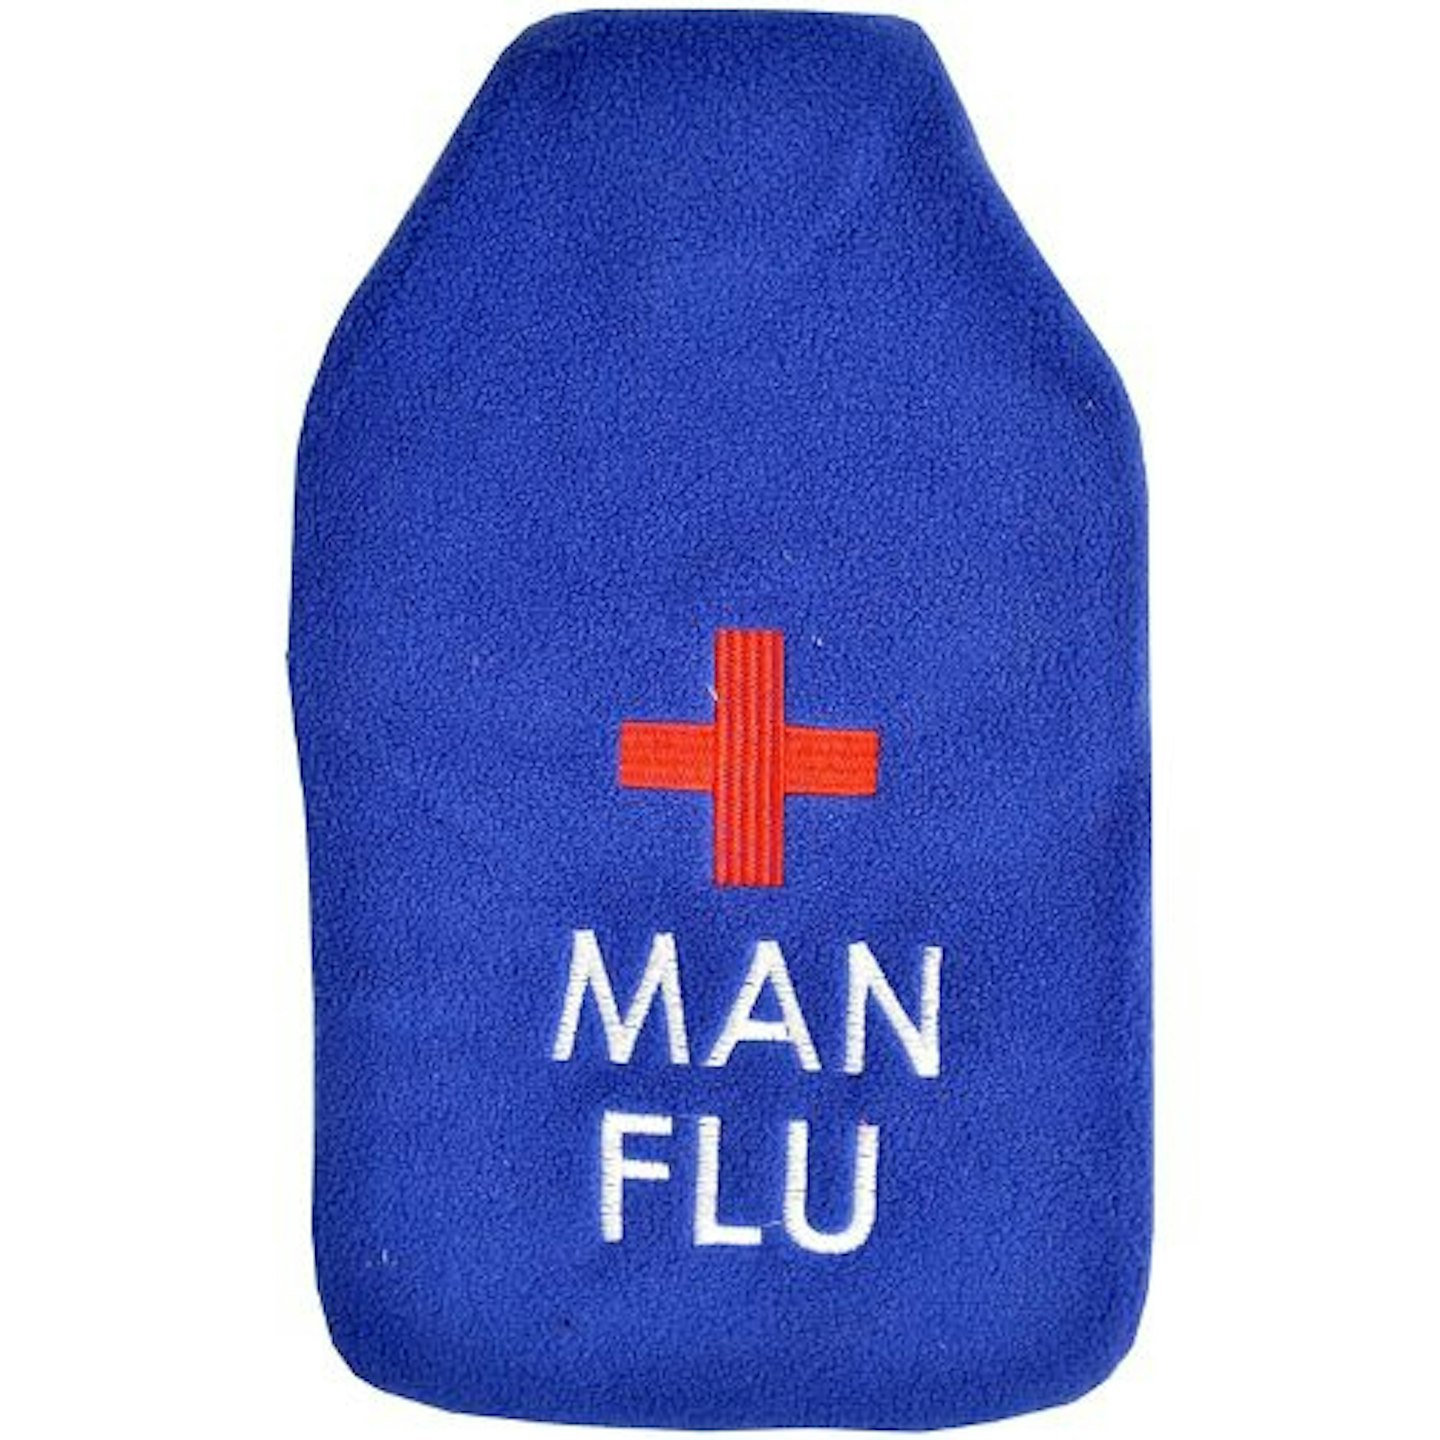 Vagabond Bags 2 Litre Man Flu Hot Water Bottle and Cover